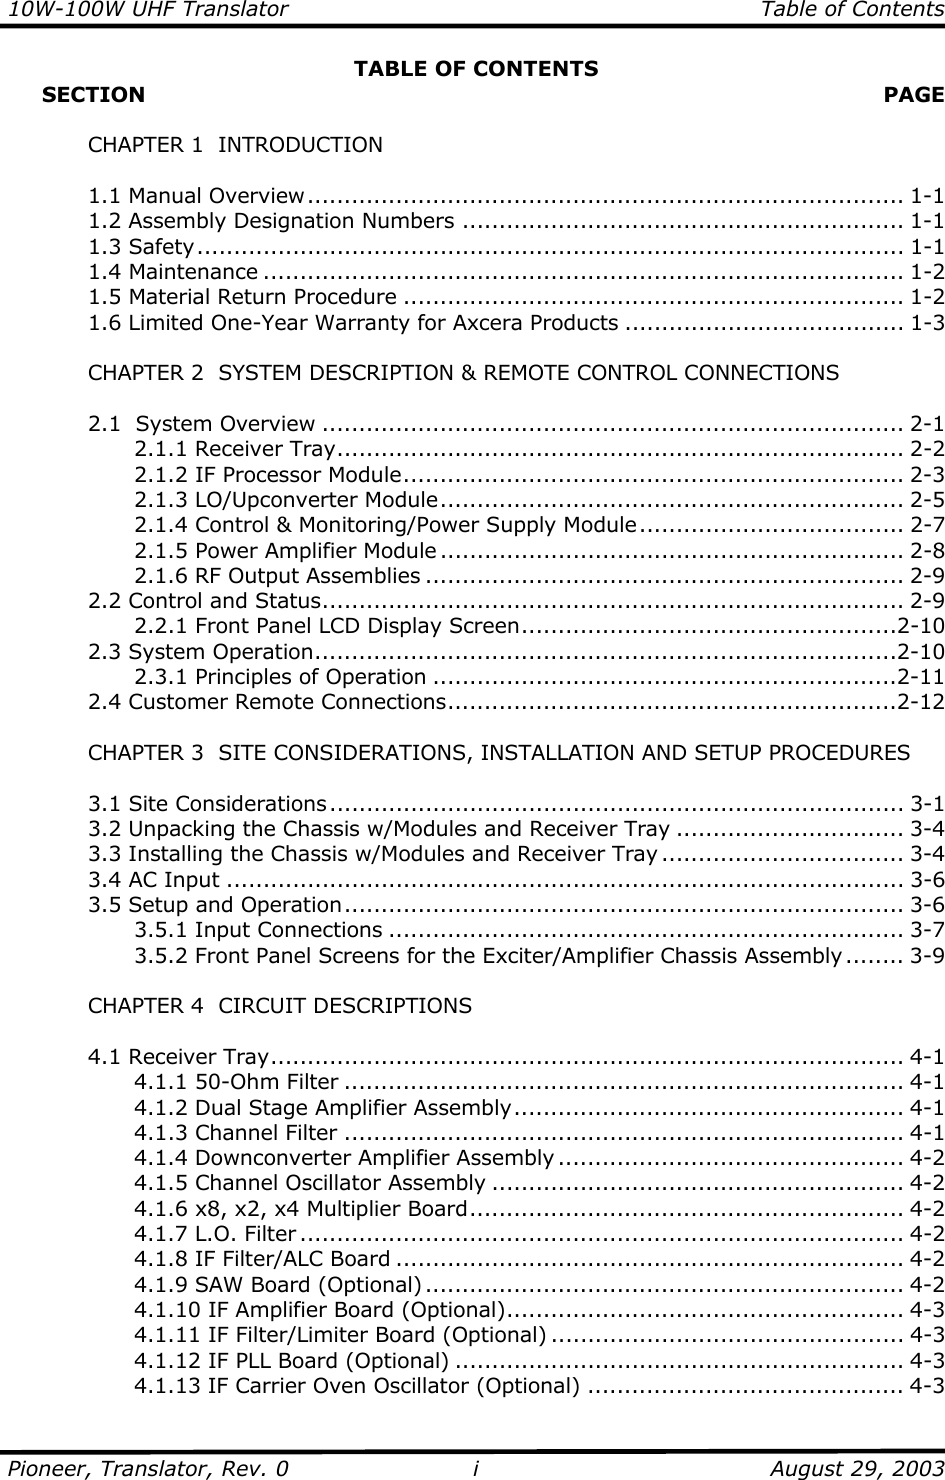 10W-100W UHF Translator    Table of Contents  Pioneer, Translator, Rev. 0    August 29, 2003 iTABLE OF CONTENTS      SECTION   PAGE     CHAPTER 1  INTRODUCTION   1.1 Manual Overview................................................................................. 1-1   1.2 Assembly Designation Numbers ............................................................ 1-1  1.3 Safety................................................................................................ 1-1  1.4 Maintenance ....................................................................................... 1-2   1.5 Material Return Procedure .................................................................... 1-2   1.6 Limited One-Year Warranty for Axcera Products ...................................... 1-3    CHAPTER 2  SYSTEM DESCRIPTION &amp; REMOTE CONTROL CONNECTIONS    2.1  System Overview ............................................................................... 2-1   2.1.1 Receiver Tray............................................................................. 2-2     2.1.2 IF Processor Module.................................................................... 2-3   2.1.3 LO/Upconverter Module............................................................... 2-5     2.1.4 Control &amp; Monitoring/Power Supply Module.................................... 2-7     2.1.5 Power Amplifier Module ............................................................... 2-8     2.1.6 RF Output Assemblies ................................................................. 2-9  2.2 Control and Status............................................................................... 2-9     2.2.1 Front Panel LCD Display Screen...................................................2-10  2.3 System Operation...............................................................................2-10   2.3.1 Principles of Operation ...............................................................2-11  2.4 Customer Remote Connections.............................................................2-12      CHAPTER 3  SITE CONSIDERATIONS, INSTALLATION AND SETUP PROCEDURES     3.1 Site Considerations.............................................................................. 3-1   3.2 Unpacking the Chassis w/Modules and Receiver Tray ............................... 3-4   3.3 Installing the Chassis w/Modules and Receiver Tray ................................. 3-4   3.4 AC Input ............................................................................................ 3-6  3.5 Setup and Operation............................................................................ 3-6   3.5.1 Input Connections ...................................................................... 3-7     3.5.2 Front Panel Screens for the Exciter/Amplifier Chassis Assembly ........ 3-9    CHAPTER 4  CIRCUIT DESCRIPTIONS   4.1 Receiver Tray...................................................................................... 4-1   4.1.1 50-Ohm Filter ............................................................................ 4-1     4.1.2 Dual Stage Amplifier Assembly..................................................... 4-1     4.1.3 Channel Filter ............................................................................ 4-1   4.1.4 Downconverter Amplifier Assembly ............................................... 4-2     4.1.5 Channel Oscillator Assembly ........................................................ 4-2     4.1.6 x8, x2, x4 Multiplier Board........................................................... 4-2   4.1.7 L.O. Filter .................................................................................. 4-2     4.1.8 IF Filter/ALC Board ..................................................................... 4-2   4.1.9 SAW Board (Optional) ................................................................. 4-2     4.1.10 IF Amplifier Board (Optional)...................................................... 4-3     4.1.11 IF Filter/Limiter Board (Optional) ................................................ 4-3     4.1.12 IF PLL Board (Optional) ............................................................. 4-3     4.1.13 IF Carrier Oven Oscillator (Optional) ........................................... 4-3 